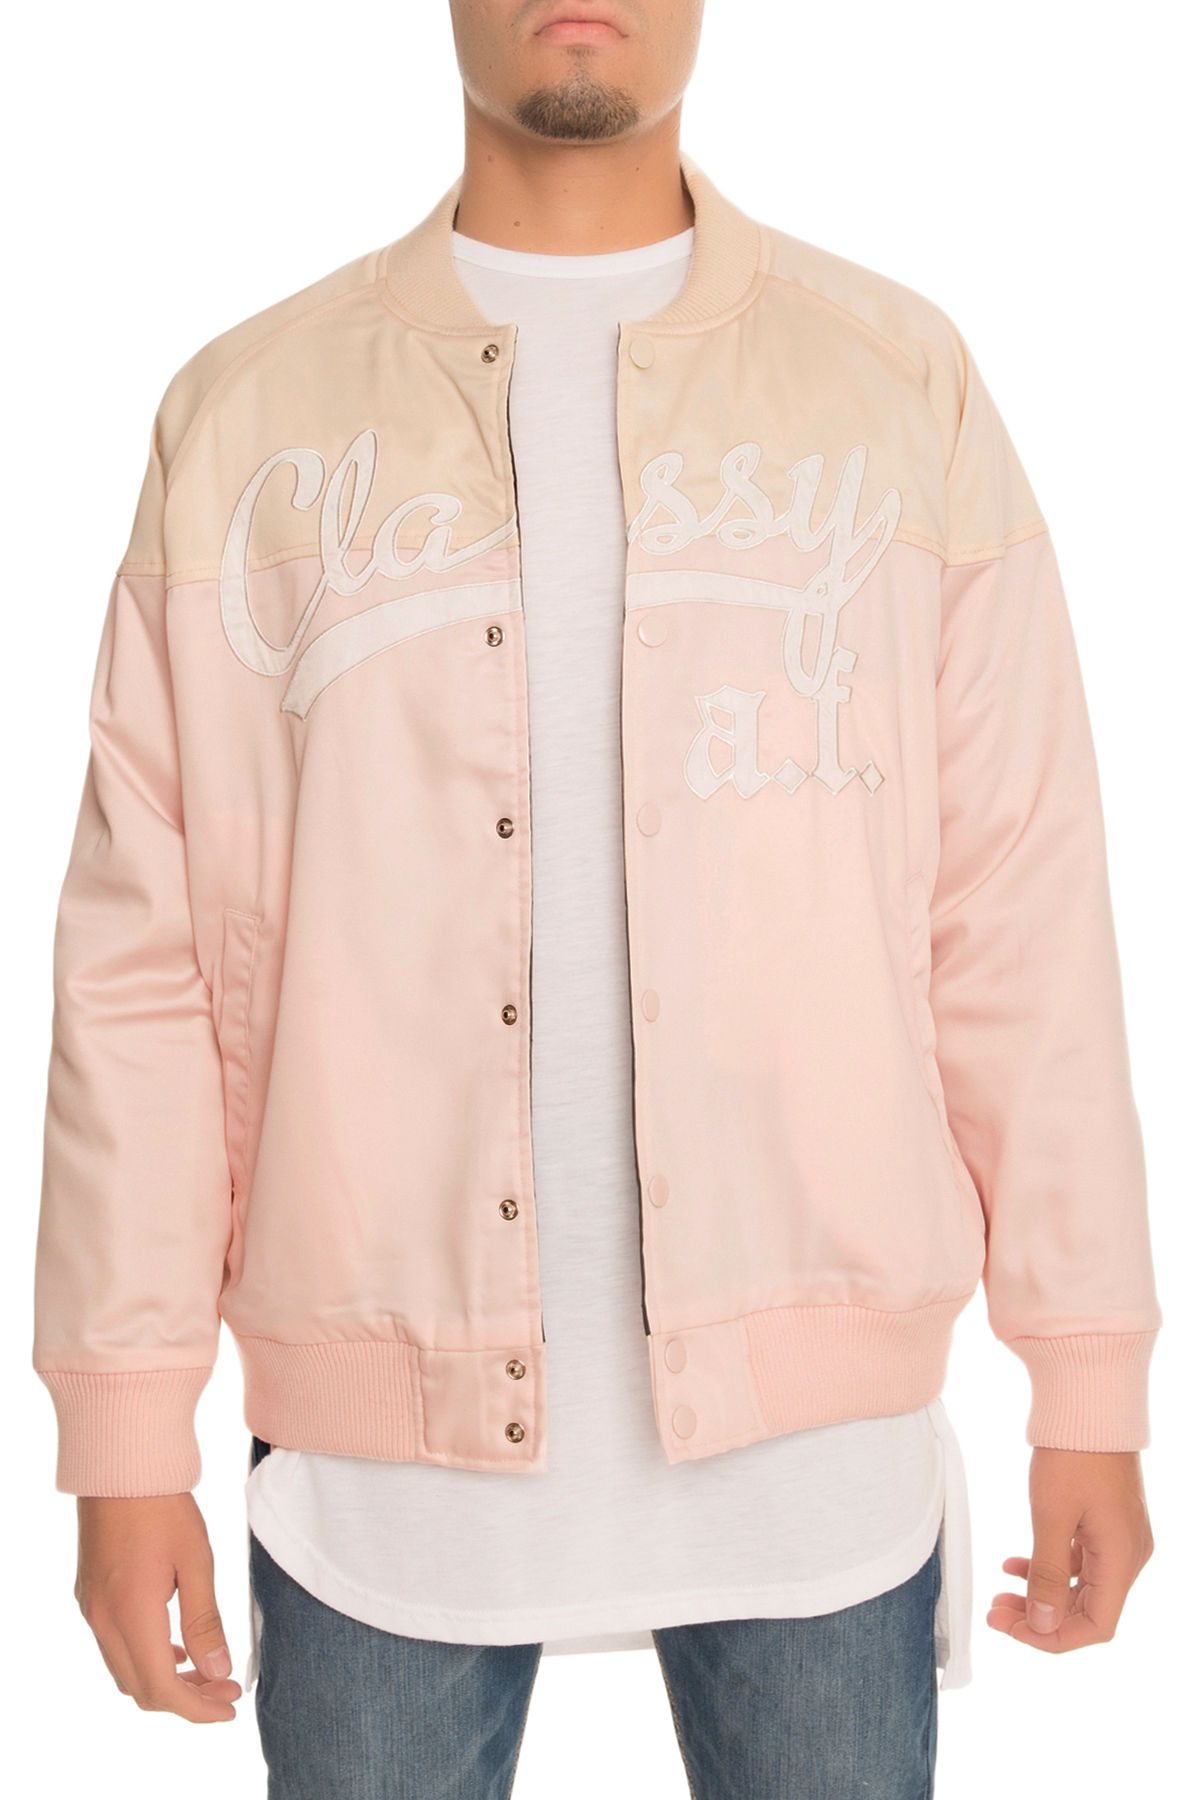 CLASSY BRAND The Classy A.F. Two Tone Baseball Jacket in Lt Pink and Beige  CMS501BB-CLASSYAF-PNK - Shiekh